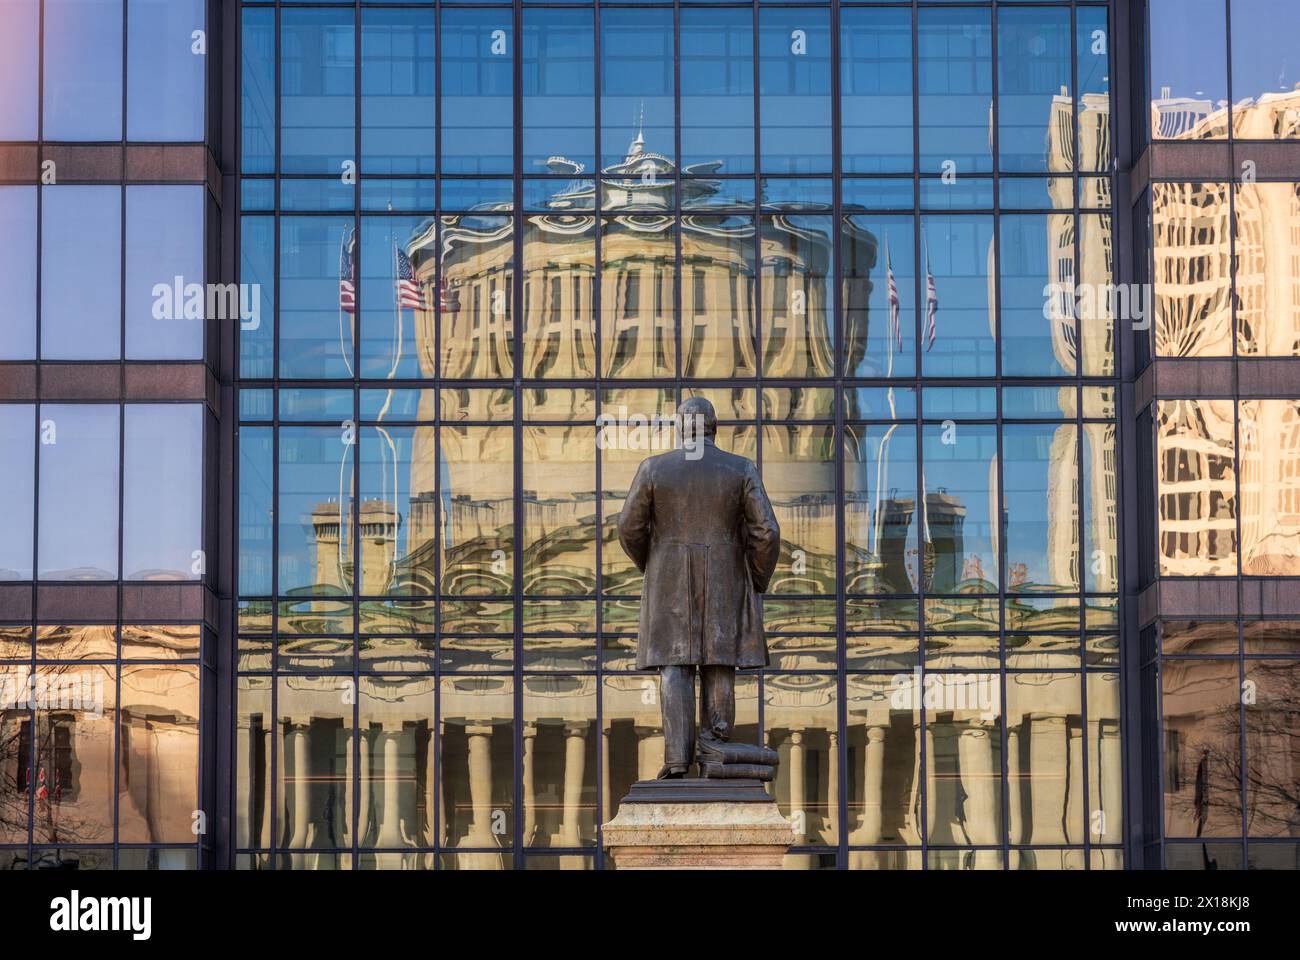 McKinley memorial in front of a reflection of the Ohio state Capitol building in the windows of an office building across the street in Columbus, OH Stock Photo